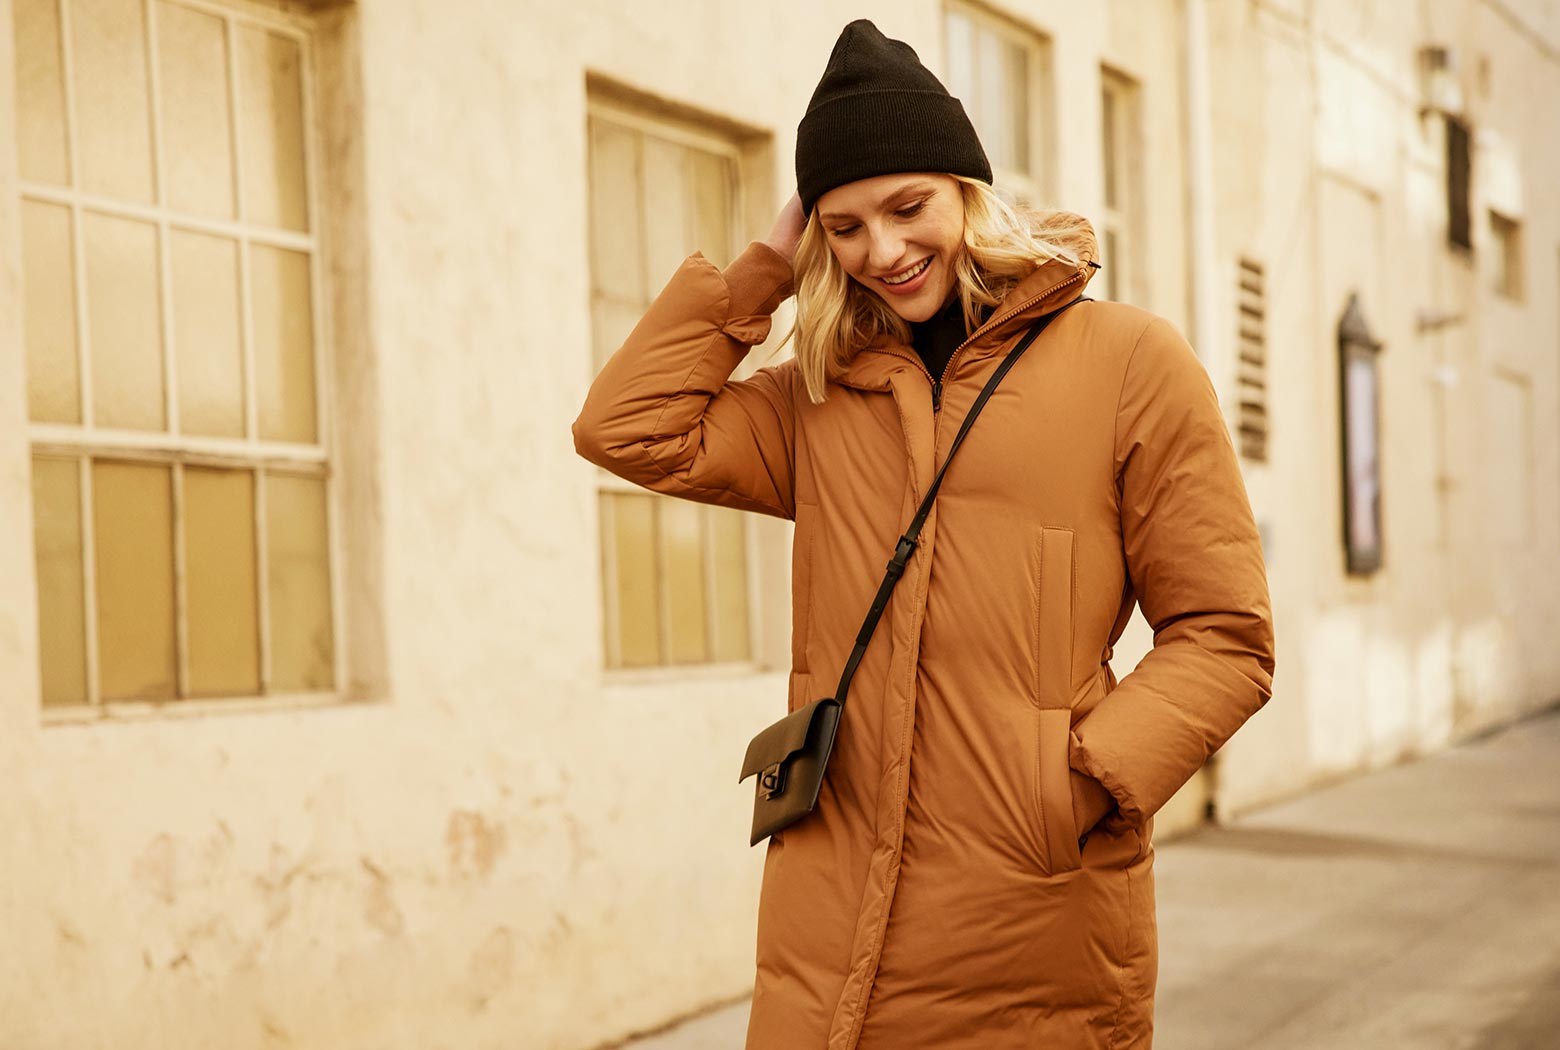 MPG female model looking happy, enjoying a walk outside in her camel colored down parka